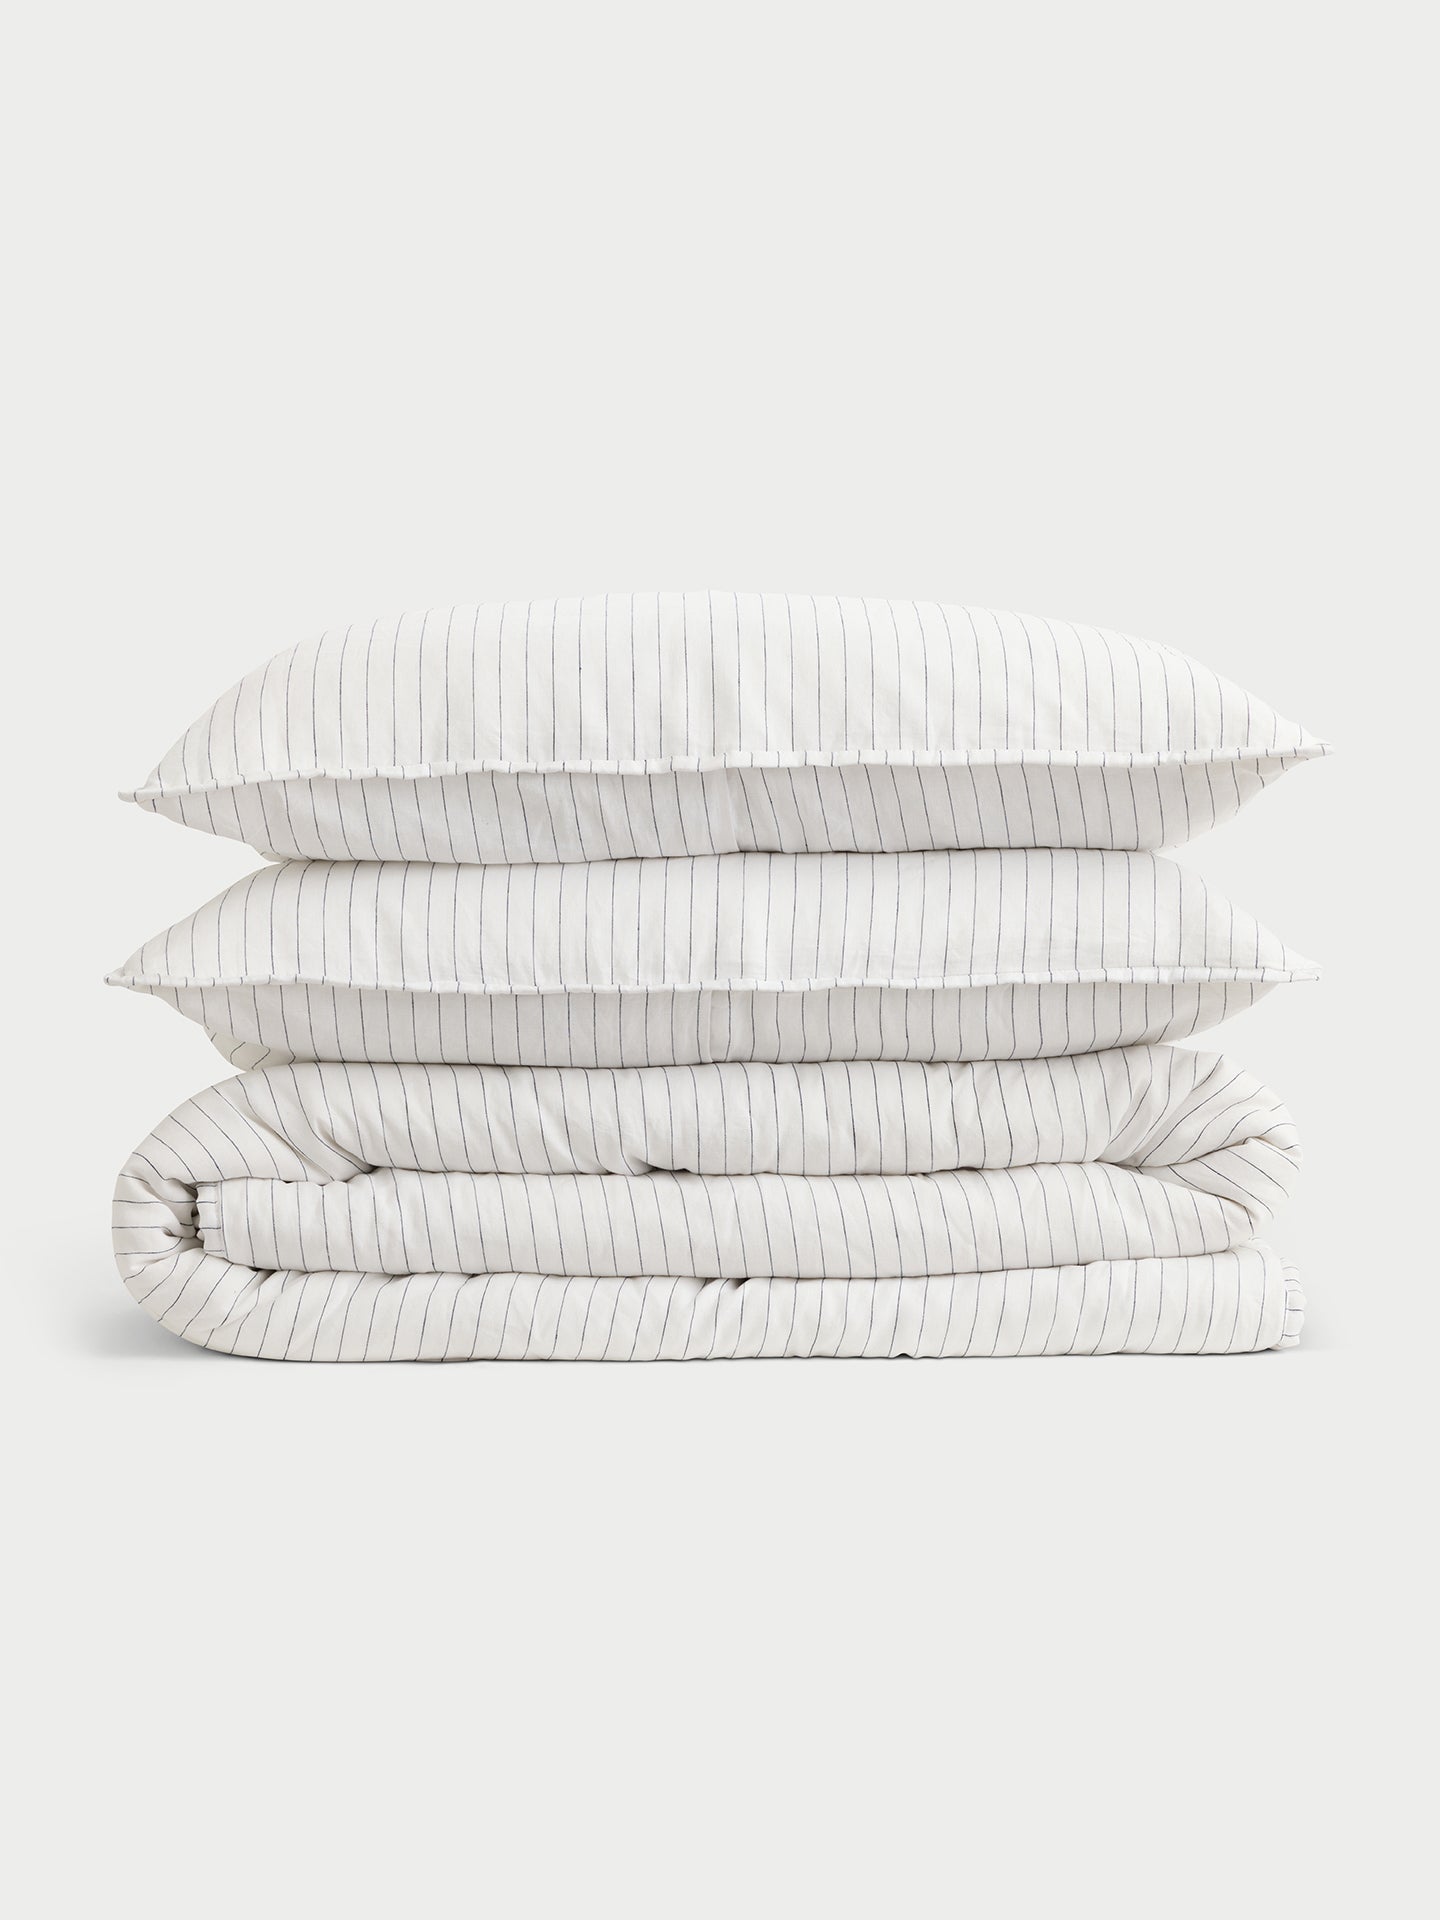 Charcoal pencil stripe quilt and shams folded with white background |Color:Charcoal/White